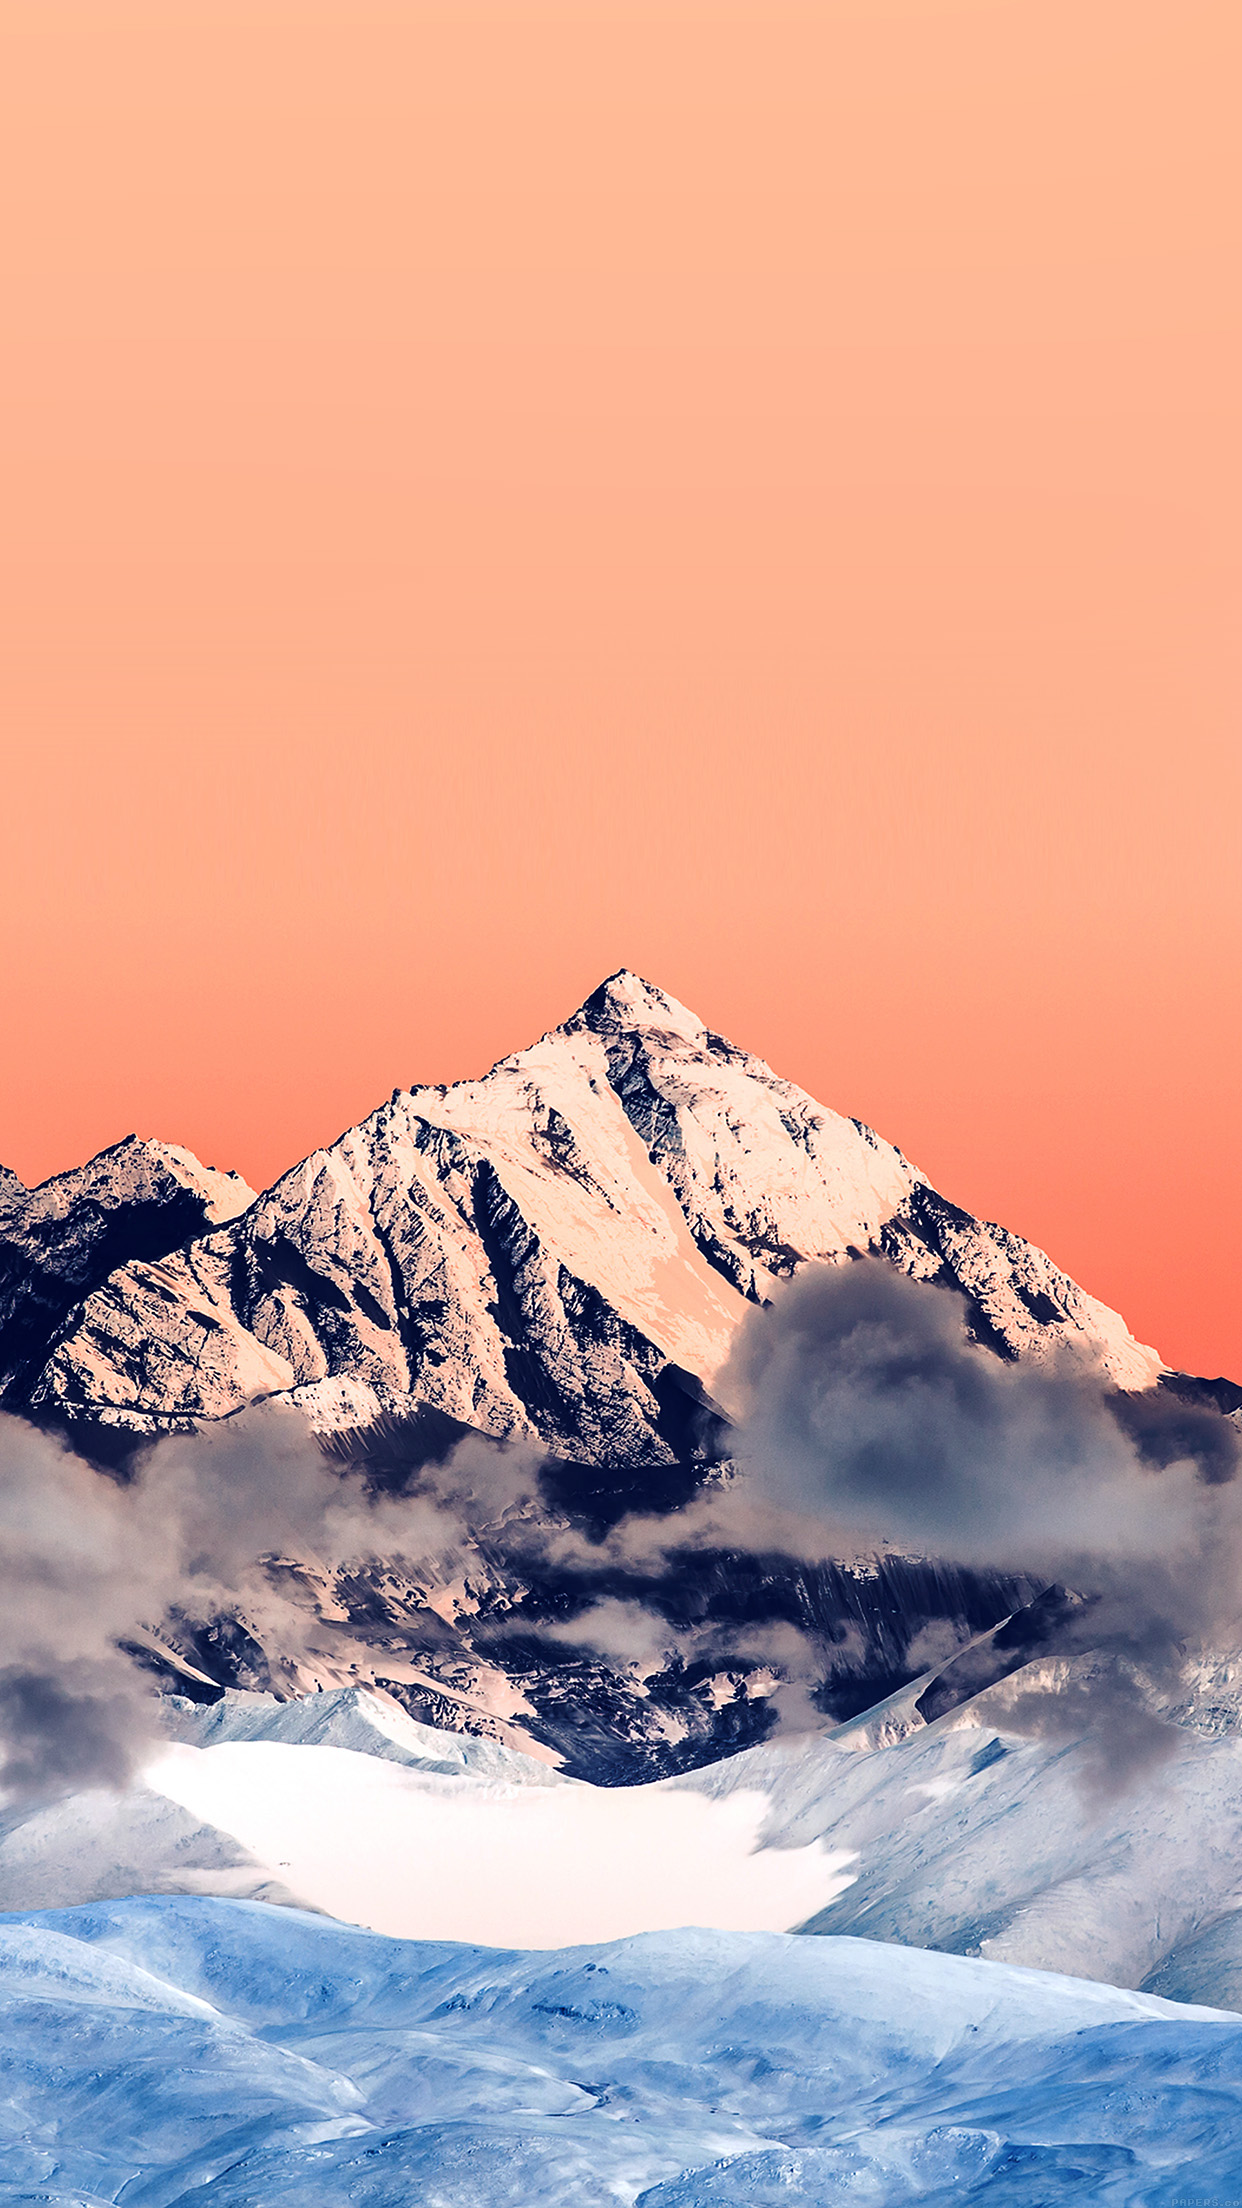 Snow Solo Orange Mountain High Nature Android Wallpaper - Iphone 7  Wallpapers Snow Mountain - 1242x2208 Wallpaper 